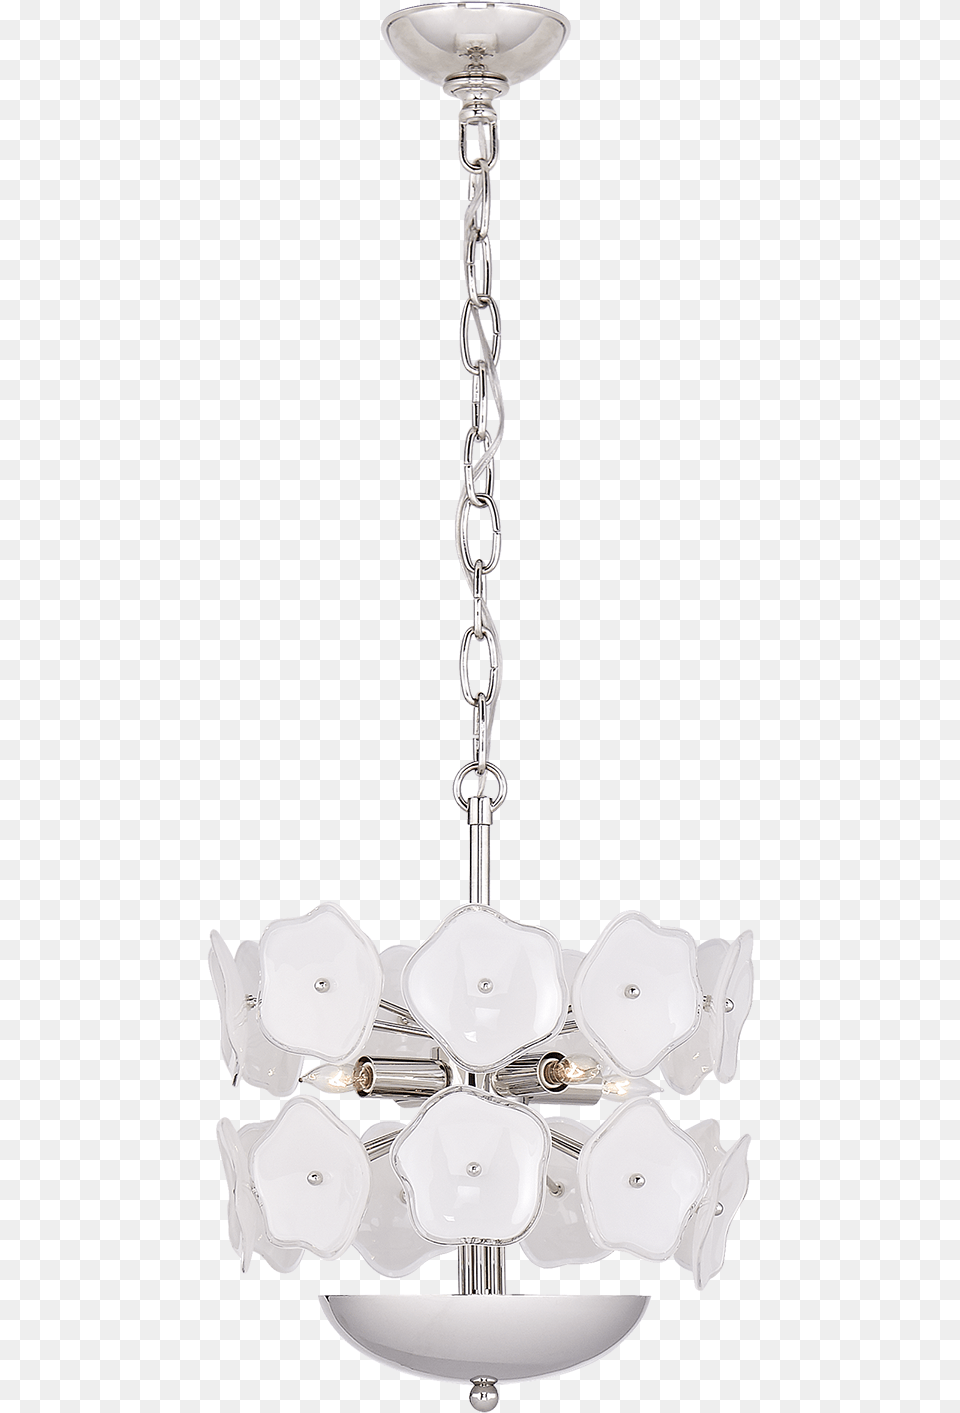 Kate Spade New York Leighton Small Chandelier Ks 5065pn Cre, Lamp Png